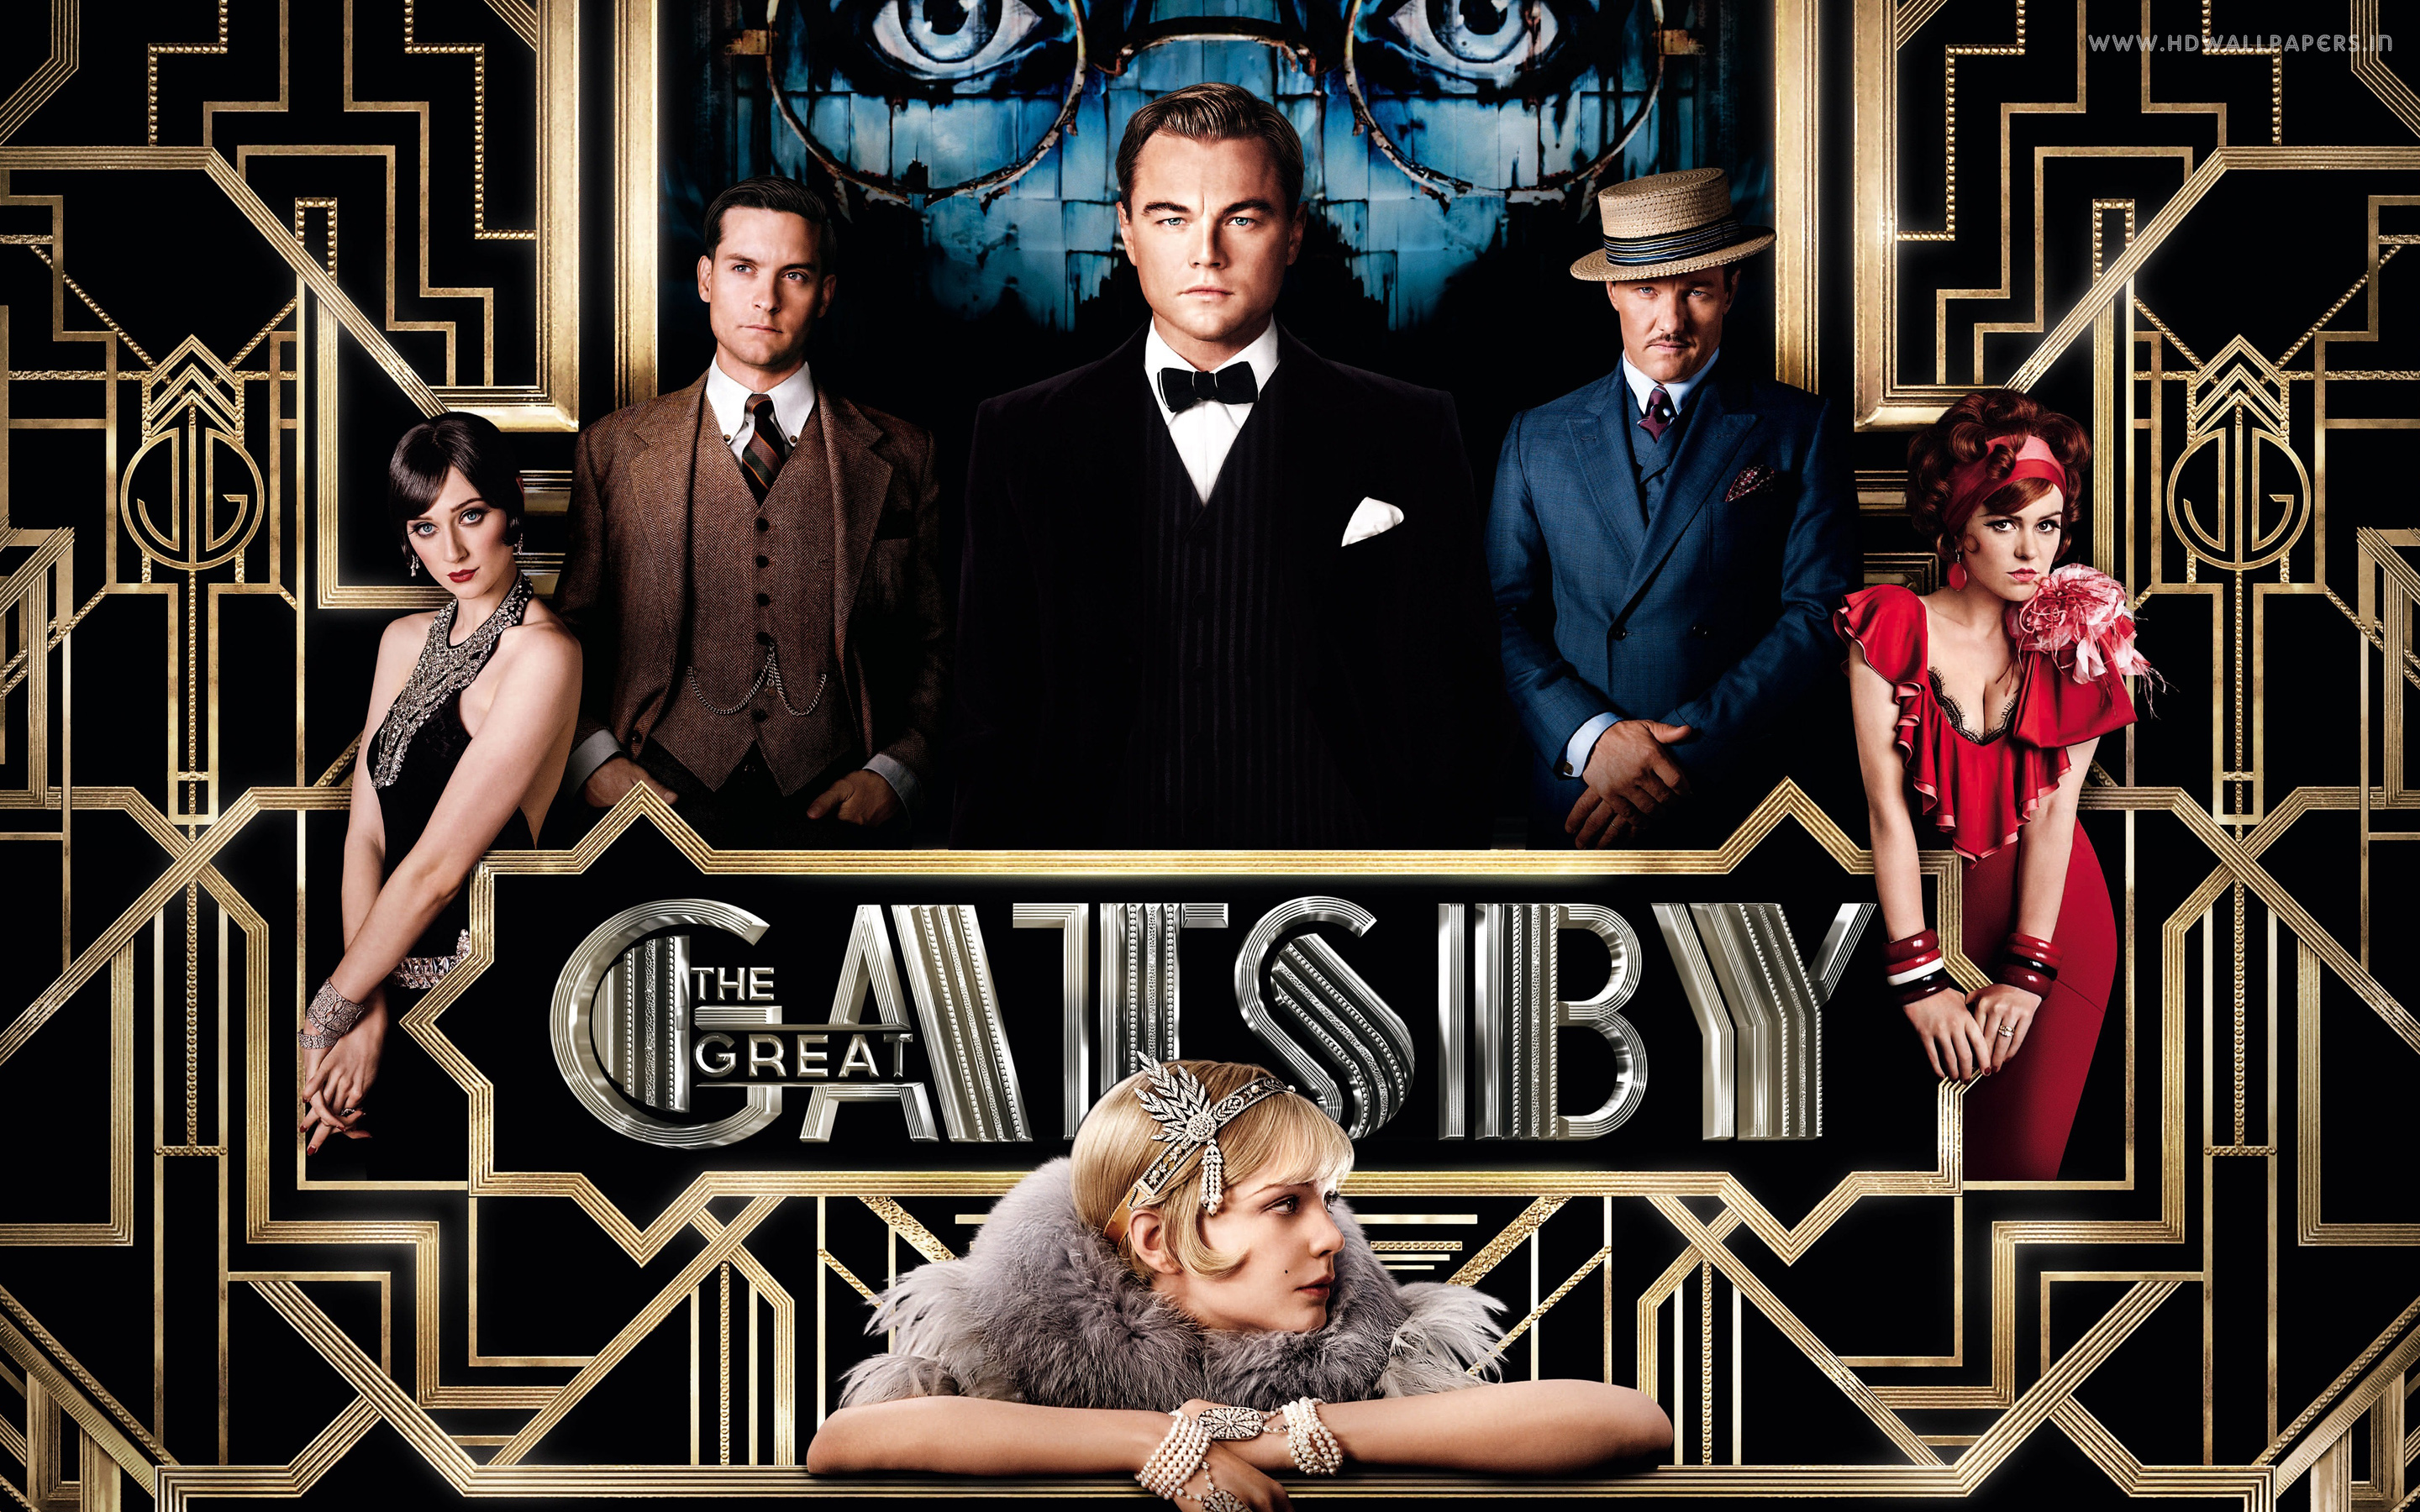 The Great Gatsby review